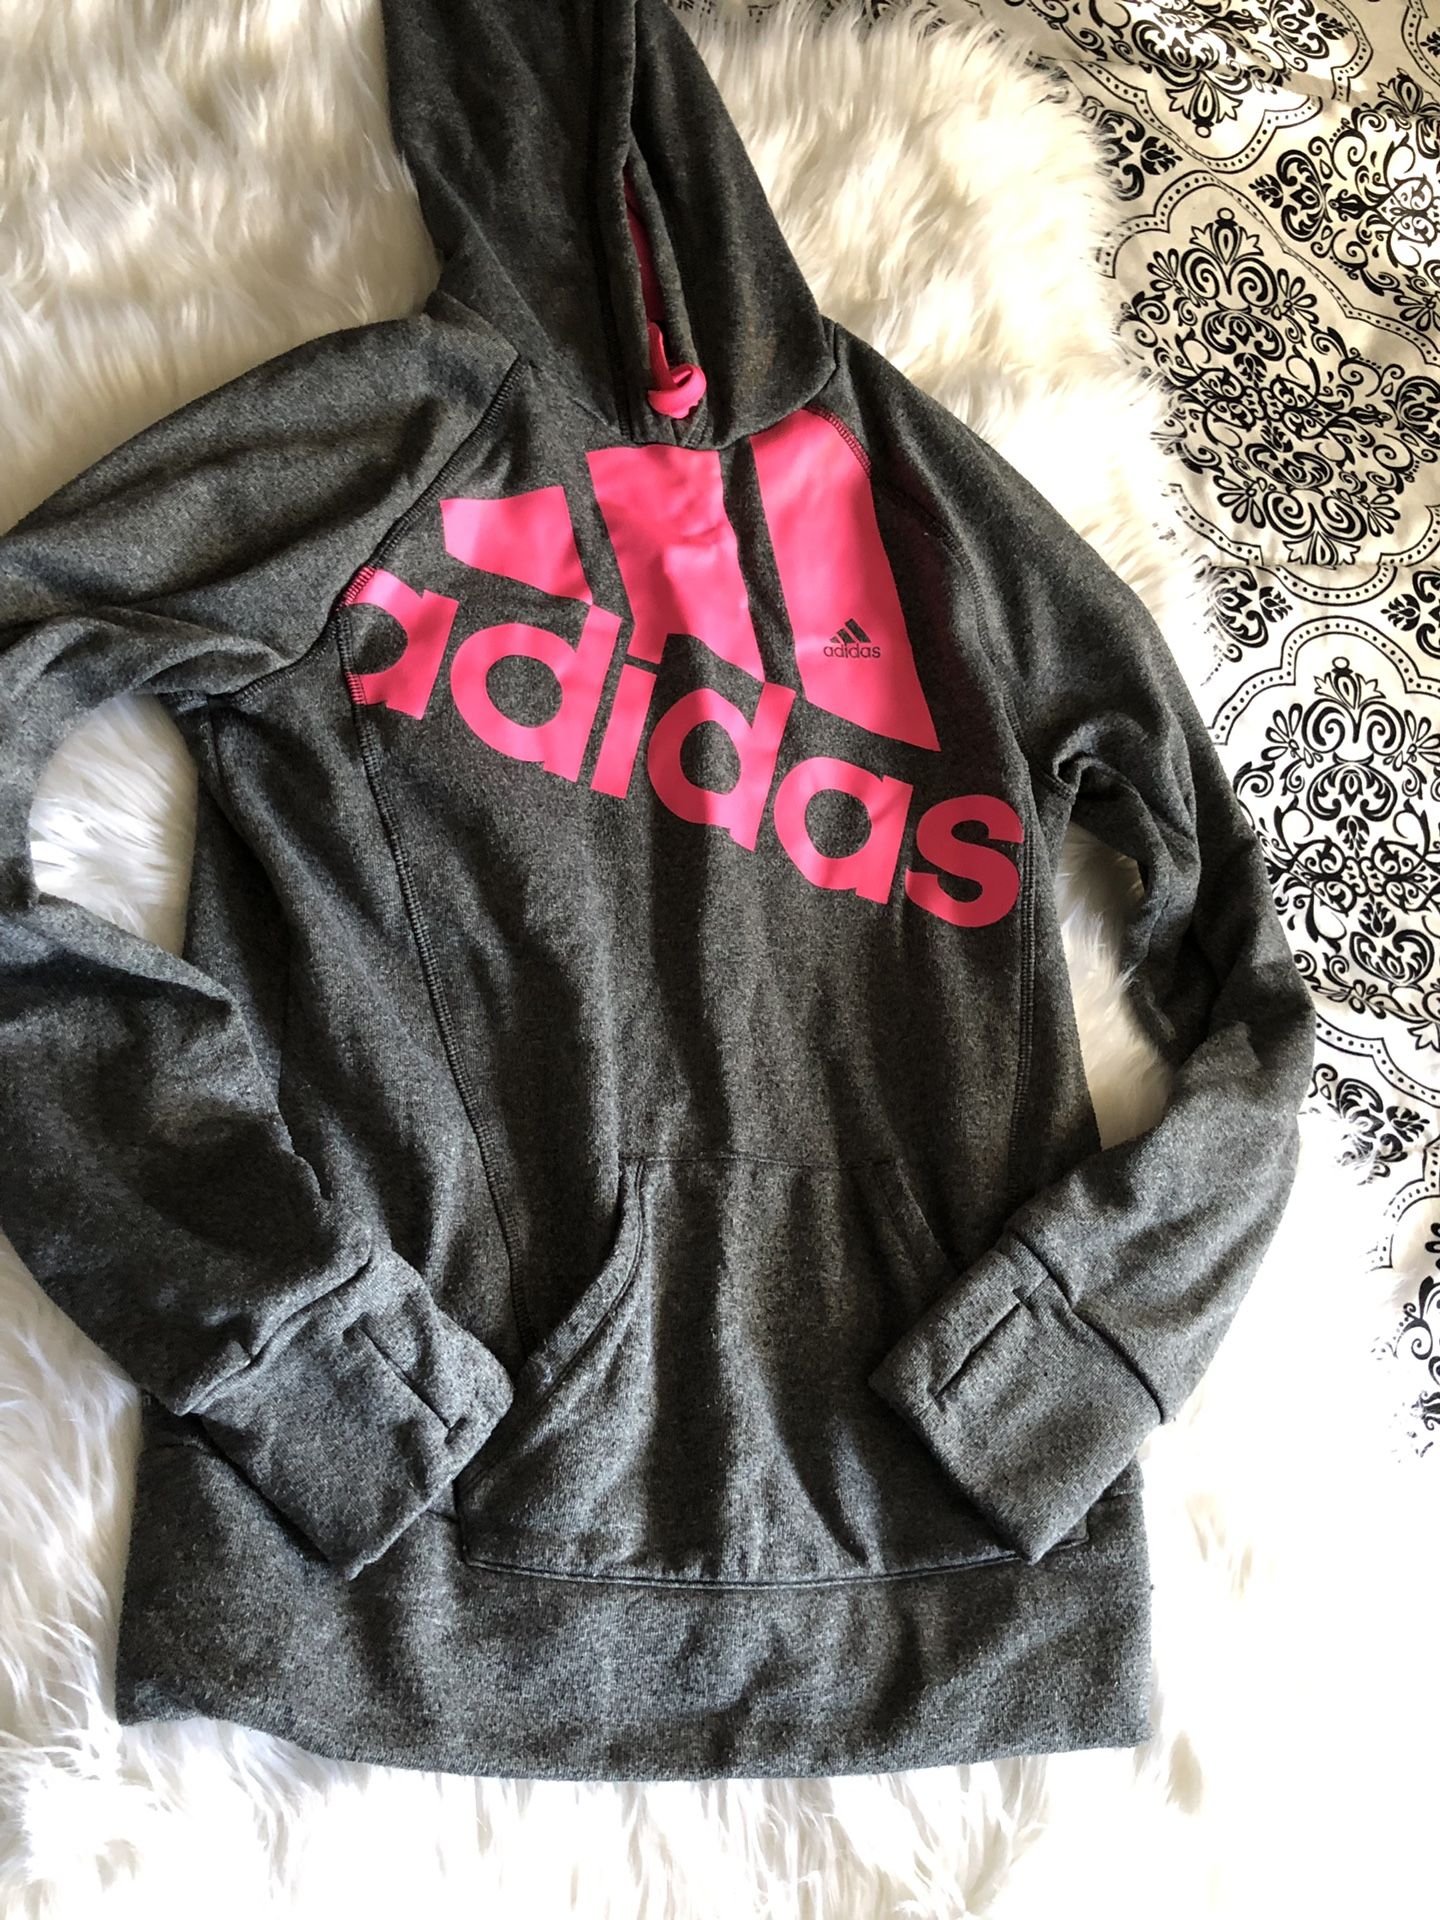 Adidas grey and pick hoodie size m